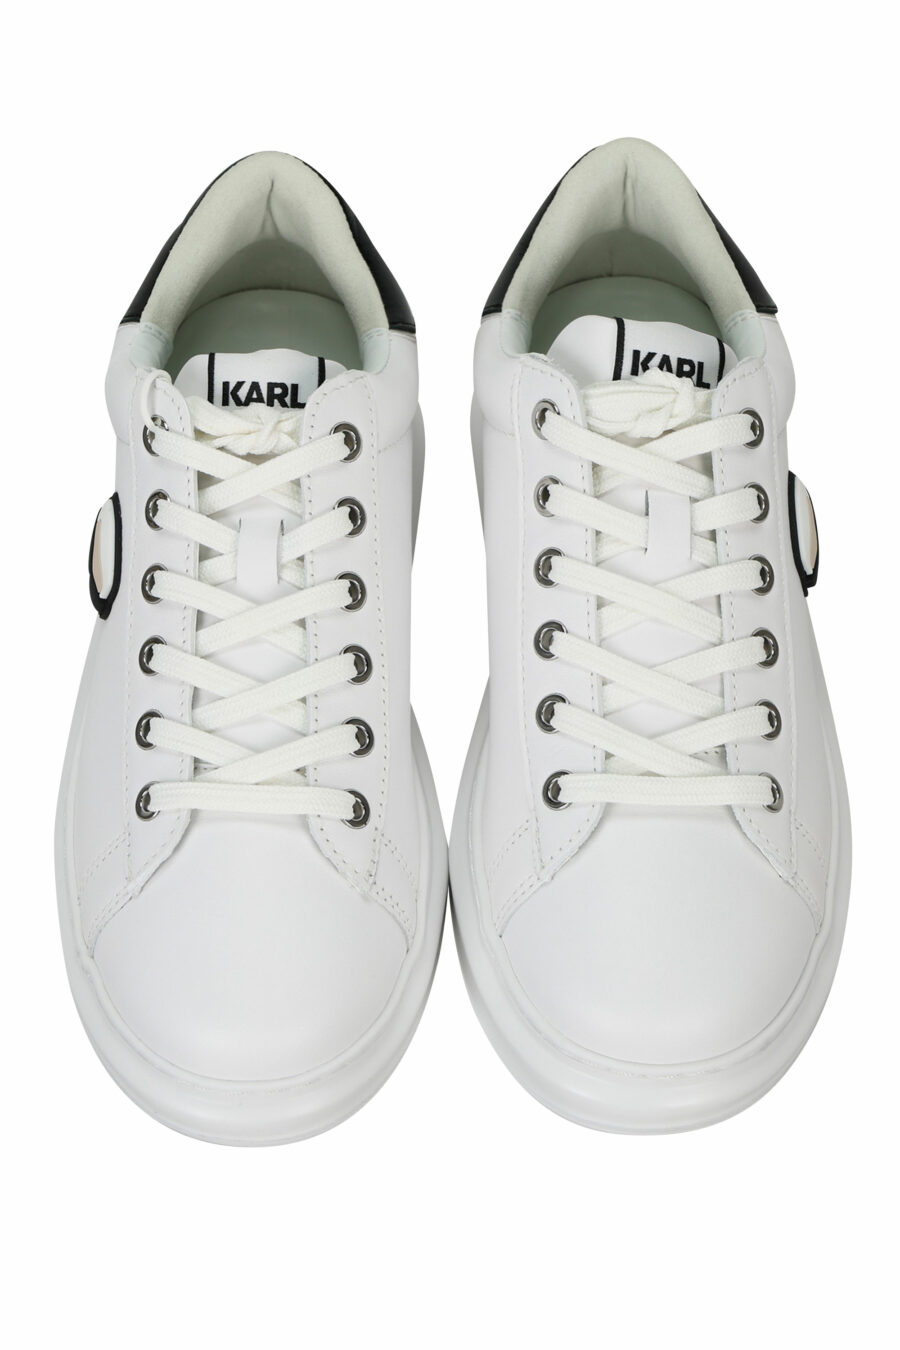 White "Kapri" trainers with rubber logo and black detail - 5059529351020 4